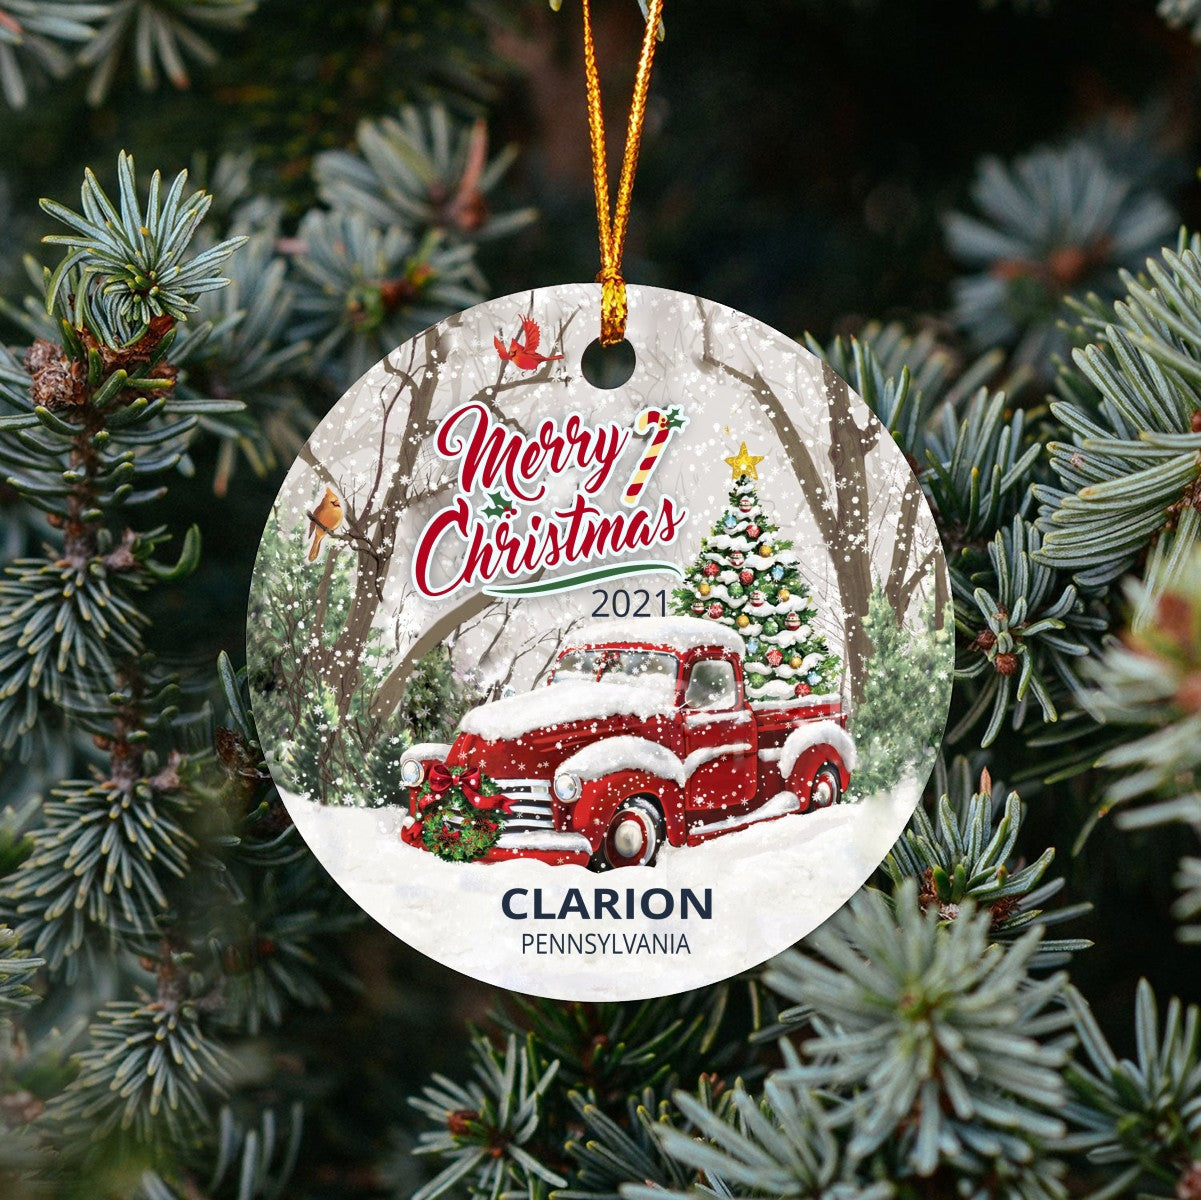 Christmas Tree Ornaments Clarion - Ornament With Name City, State Clarion Pennsylvania PA Ornament - Red Truck Xmas Ornaments 3'' Plastic Gift For Family, Friend And Housewarming